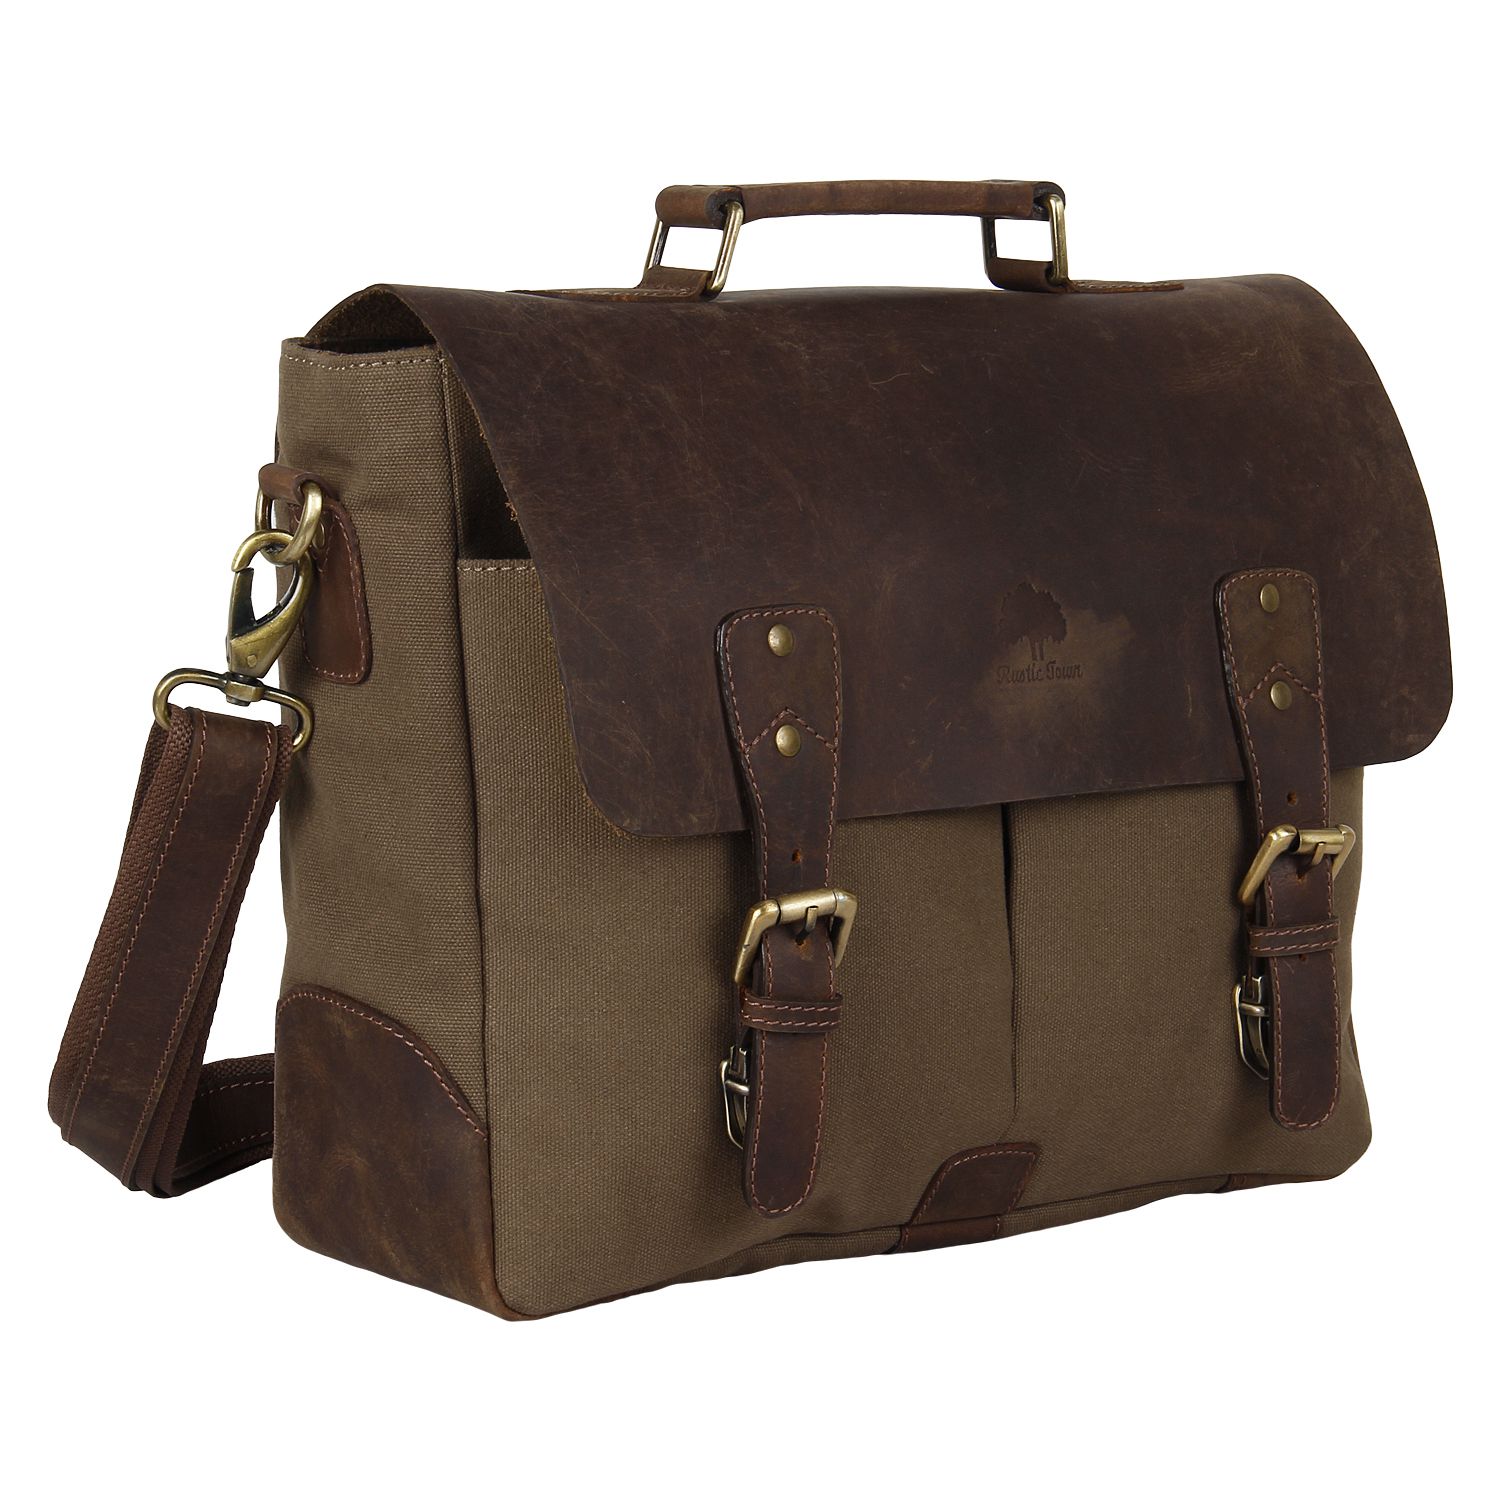 Rustic Town Brown Leather Laptop Bag - Buy Rustic Town Brown Leather ...